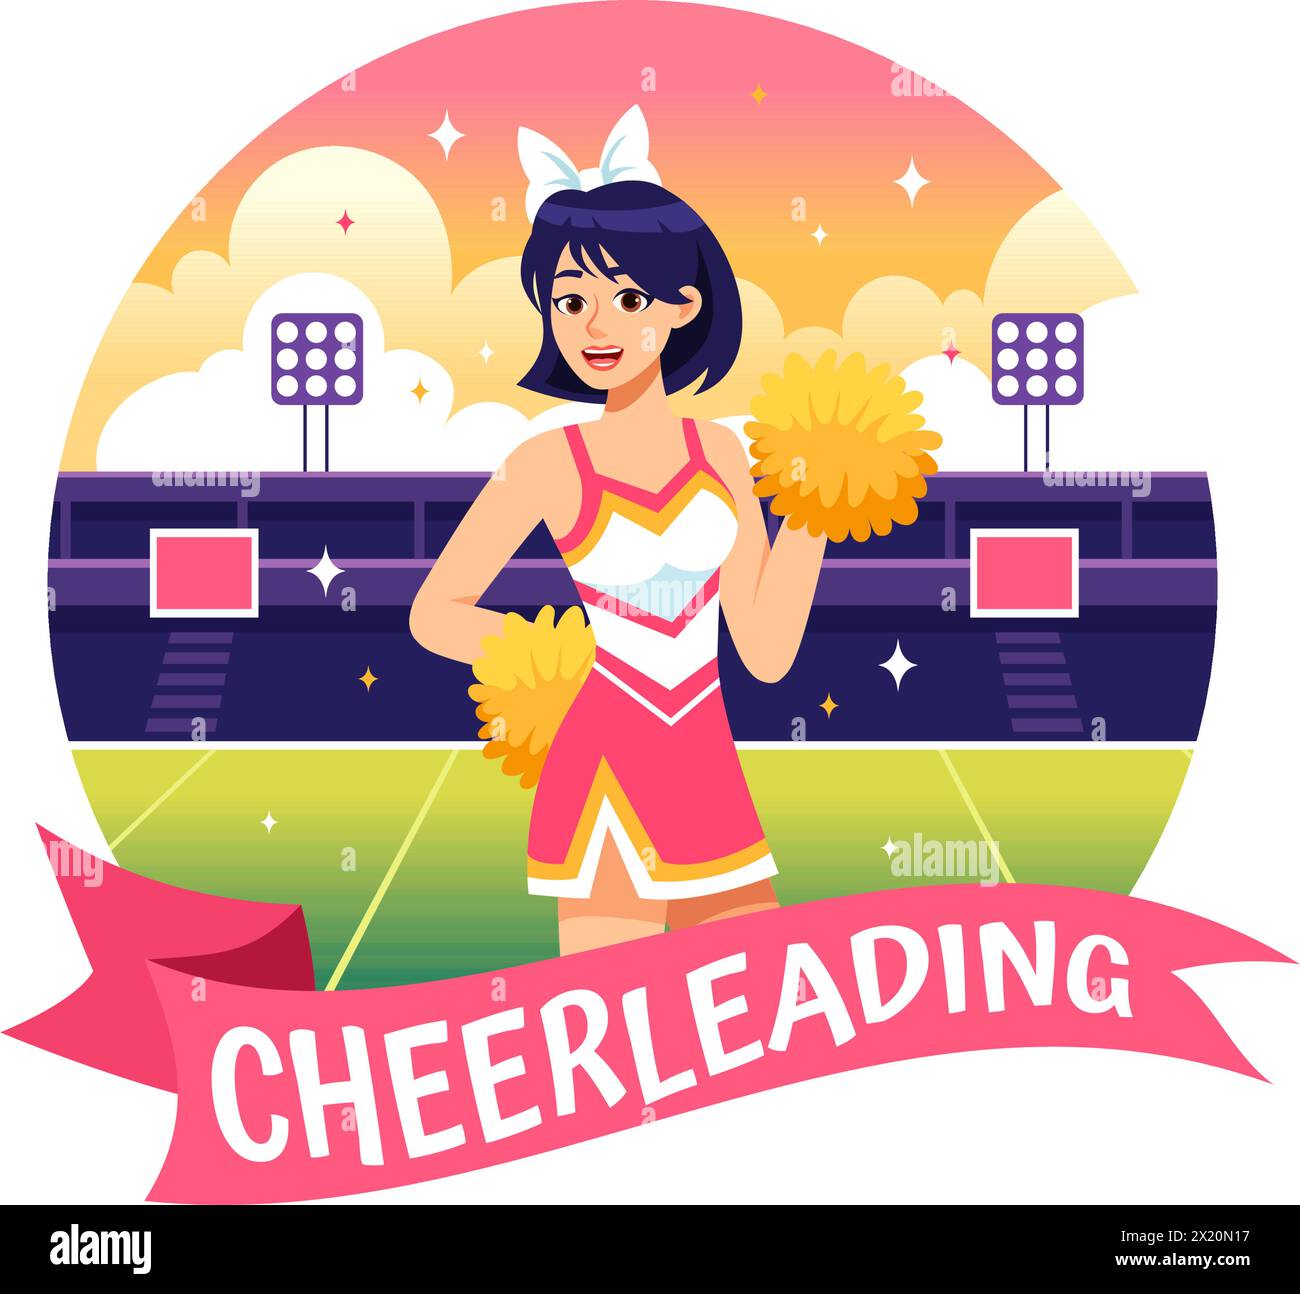 Cheerleader Girl Vector Illustration with Cheerleading Pom Poms of Dancing and Jumping to Support Team Sport During Competition on Flat Background Stock Vector